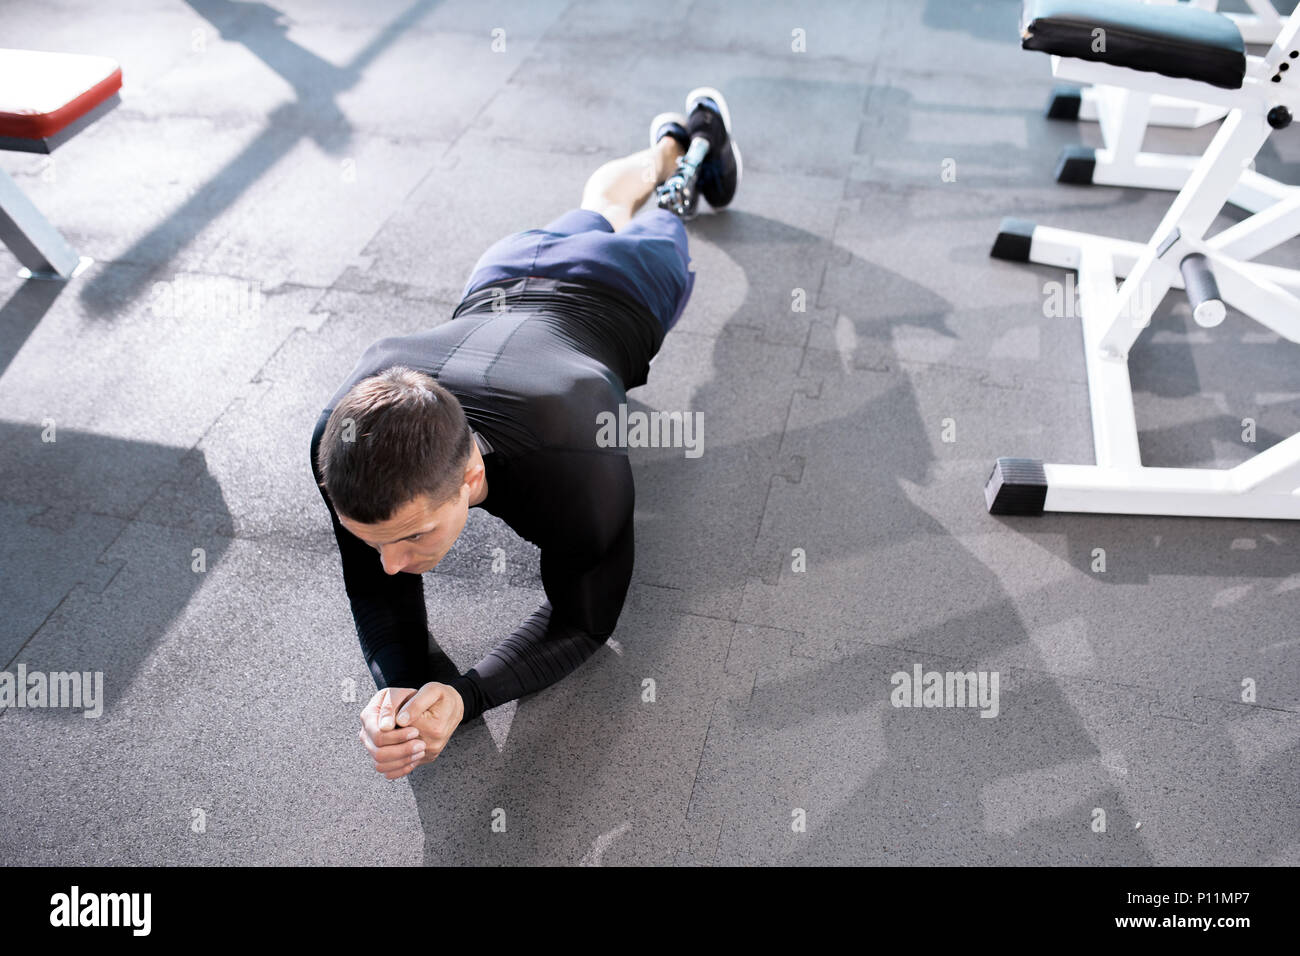 Push-ups in the gym Stock Photo